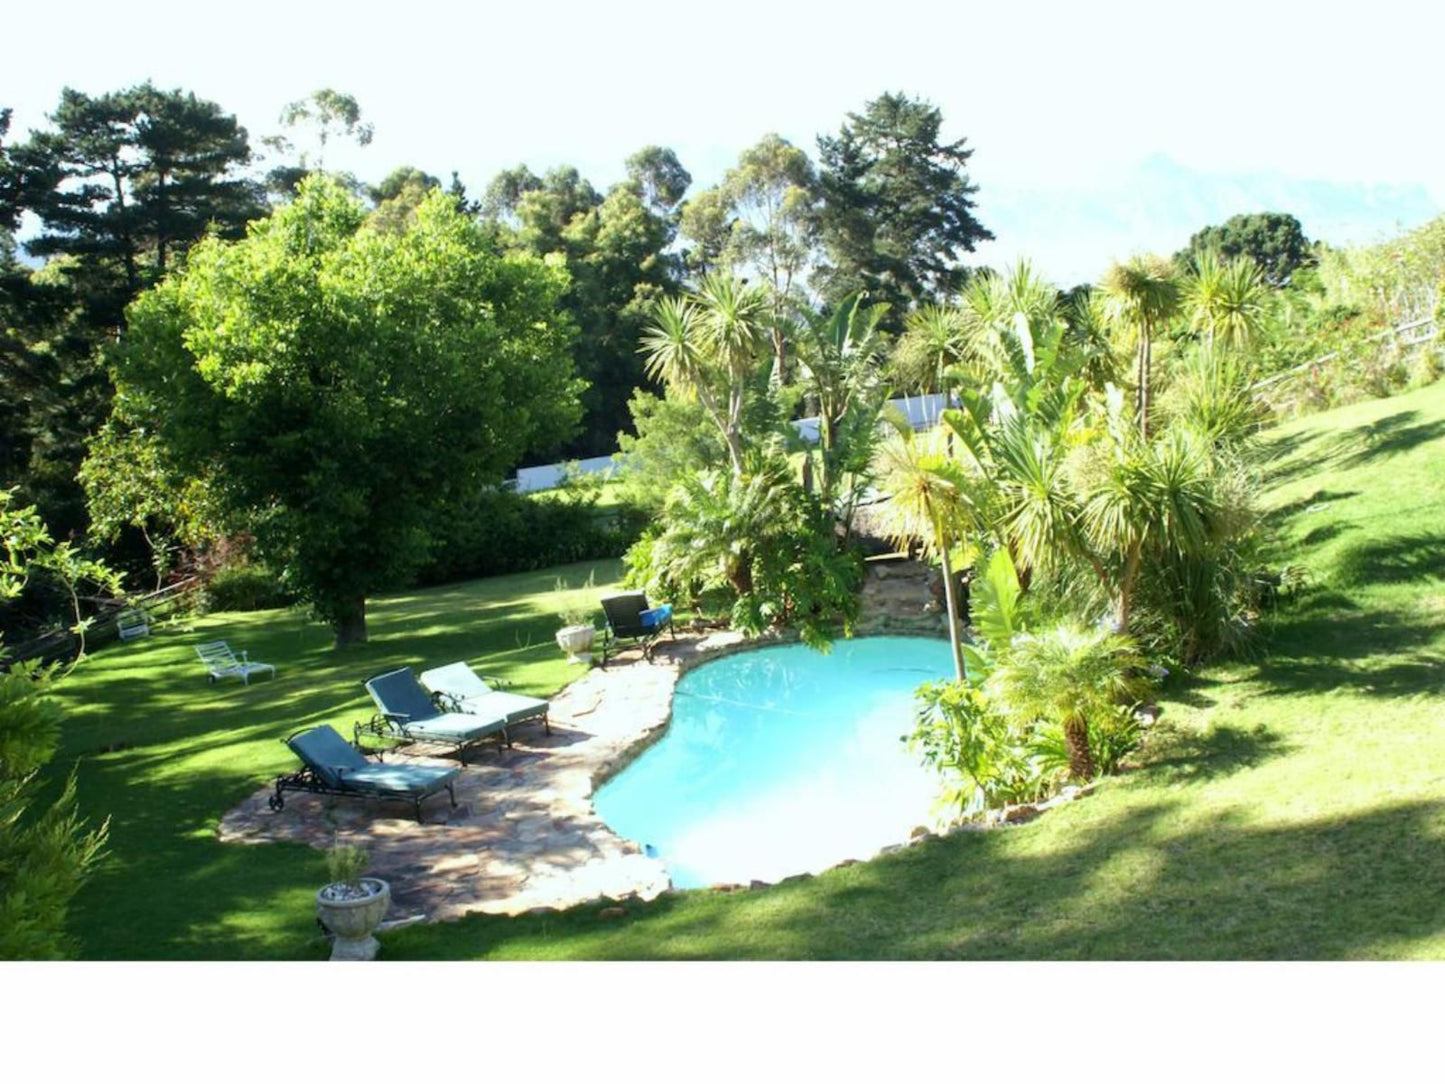 De Molen Guest House Spanish Farm Ext 1 Somerset West Western Cape South Africa Palm Tree, Plant, Nature, Wood, Garden, Swimming Pool